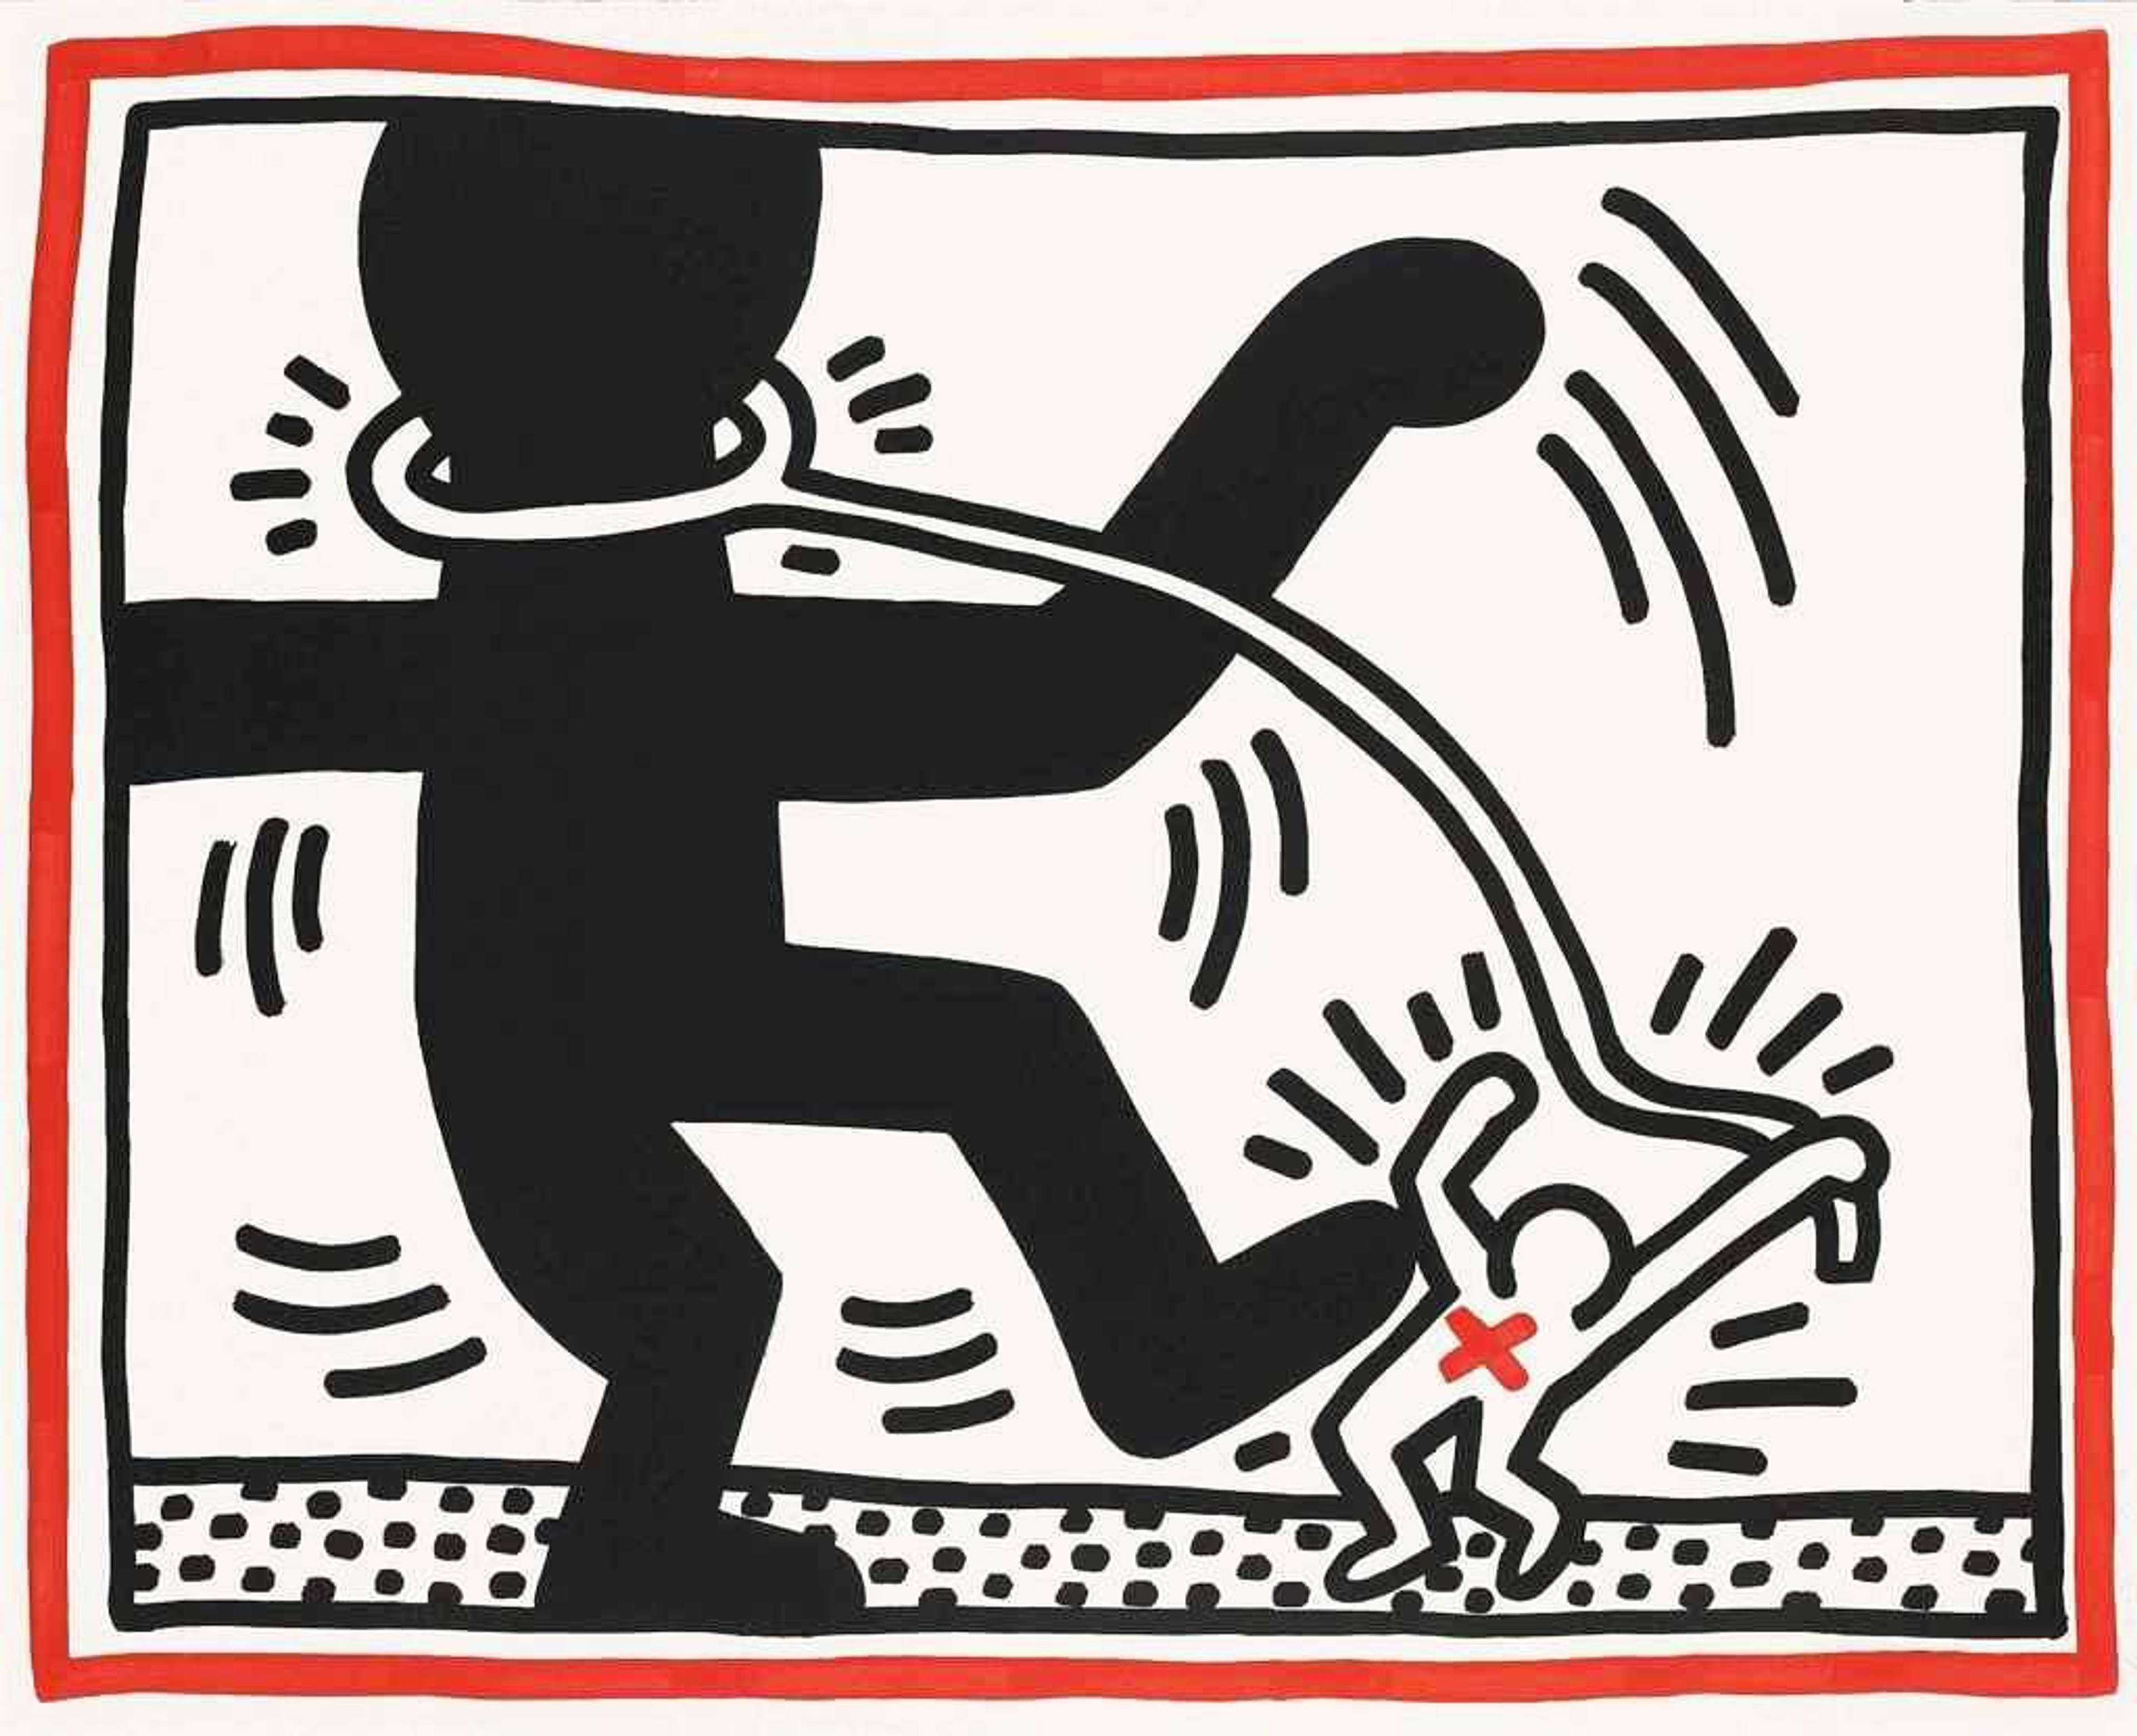 Keith Haring’s Free South Africa 2. A Pop Art screenprint of a black figure raising its foot, stepping on the outline of a white figure.